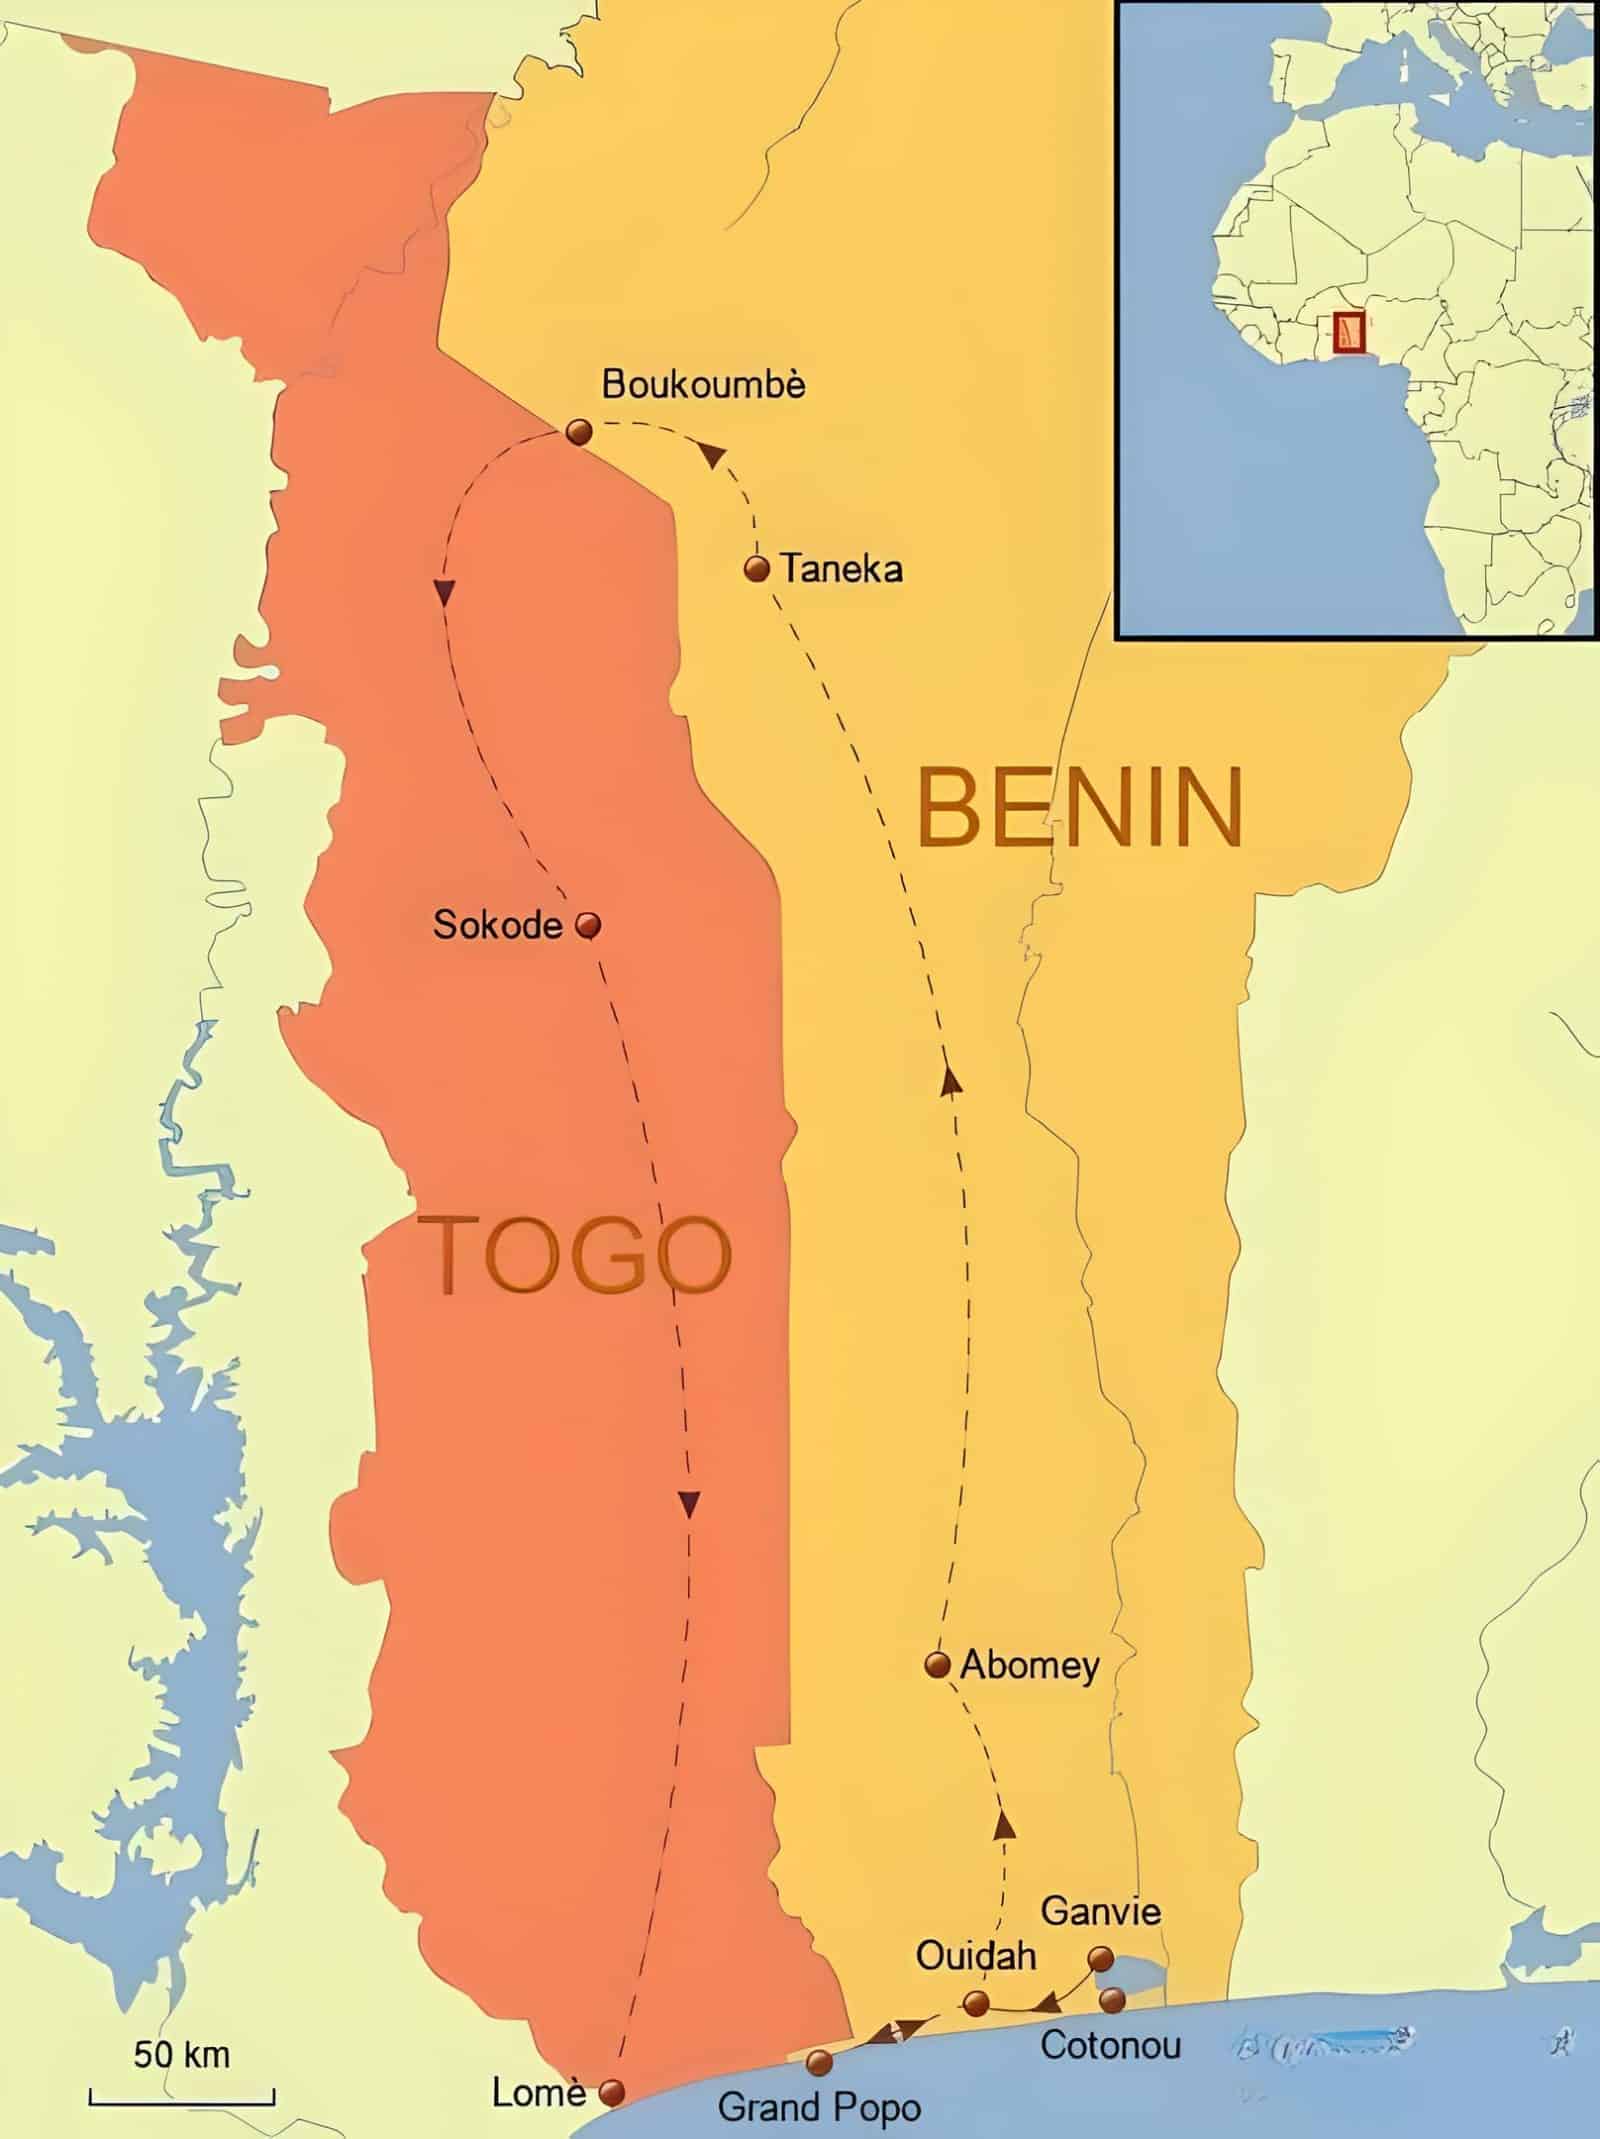 FG Suspends Evaluation of Degrees from Benin and Togo